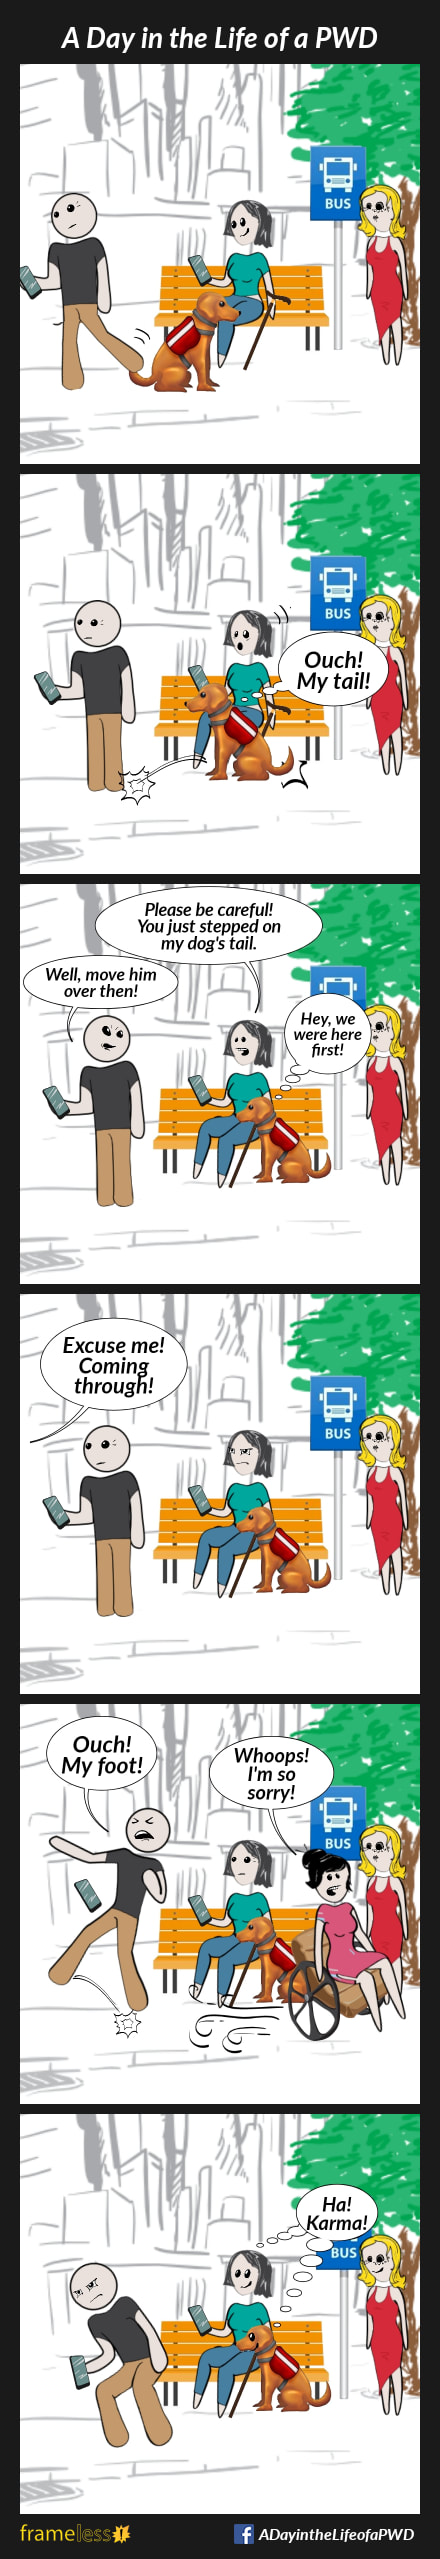 COMIC STRIP 
A Day in the Life of a PWD (Person With a Disability) 

Frame 1:
A woman, who uses a cane, is sitting at a bus stop, looking at her phone. Her service dog sits at her feet. A man stands next to them looking at his phone. Another woman stands nearby.

Frame 2:
The man takes a step back, accidentally stepping on the service dog's tail.
The dog leaps away.
DOG (thinking): 